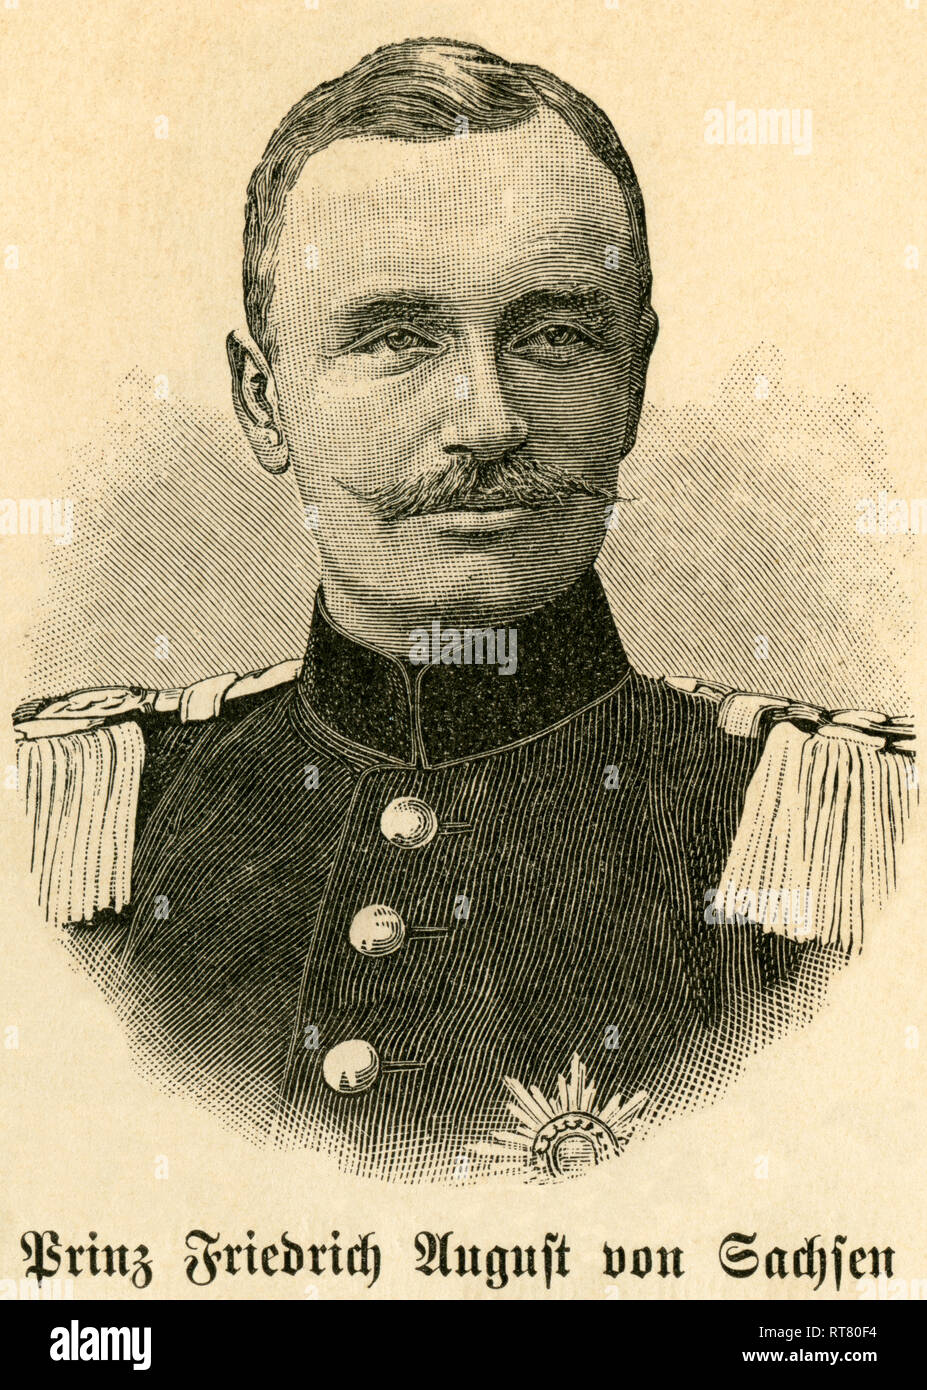 Prince Frederick Augustus of Saxony (later king Frederick Augustus III of Saxony), portrait from: 'Deutschlands Heerführer' (German military leader), portrayed by Sprößer, publishing house Ferdinand Hirt and son, Leipzig, 1895., Additional-Rights-Clearance-Info-Not-Available Stock Photo